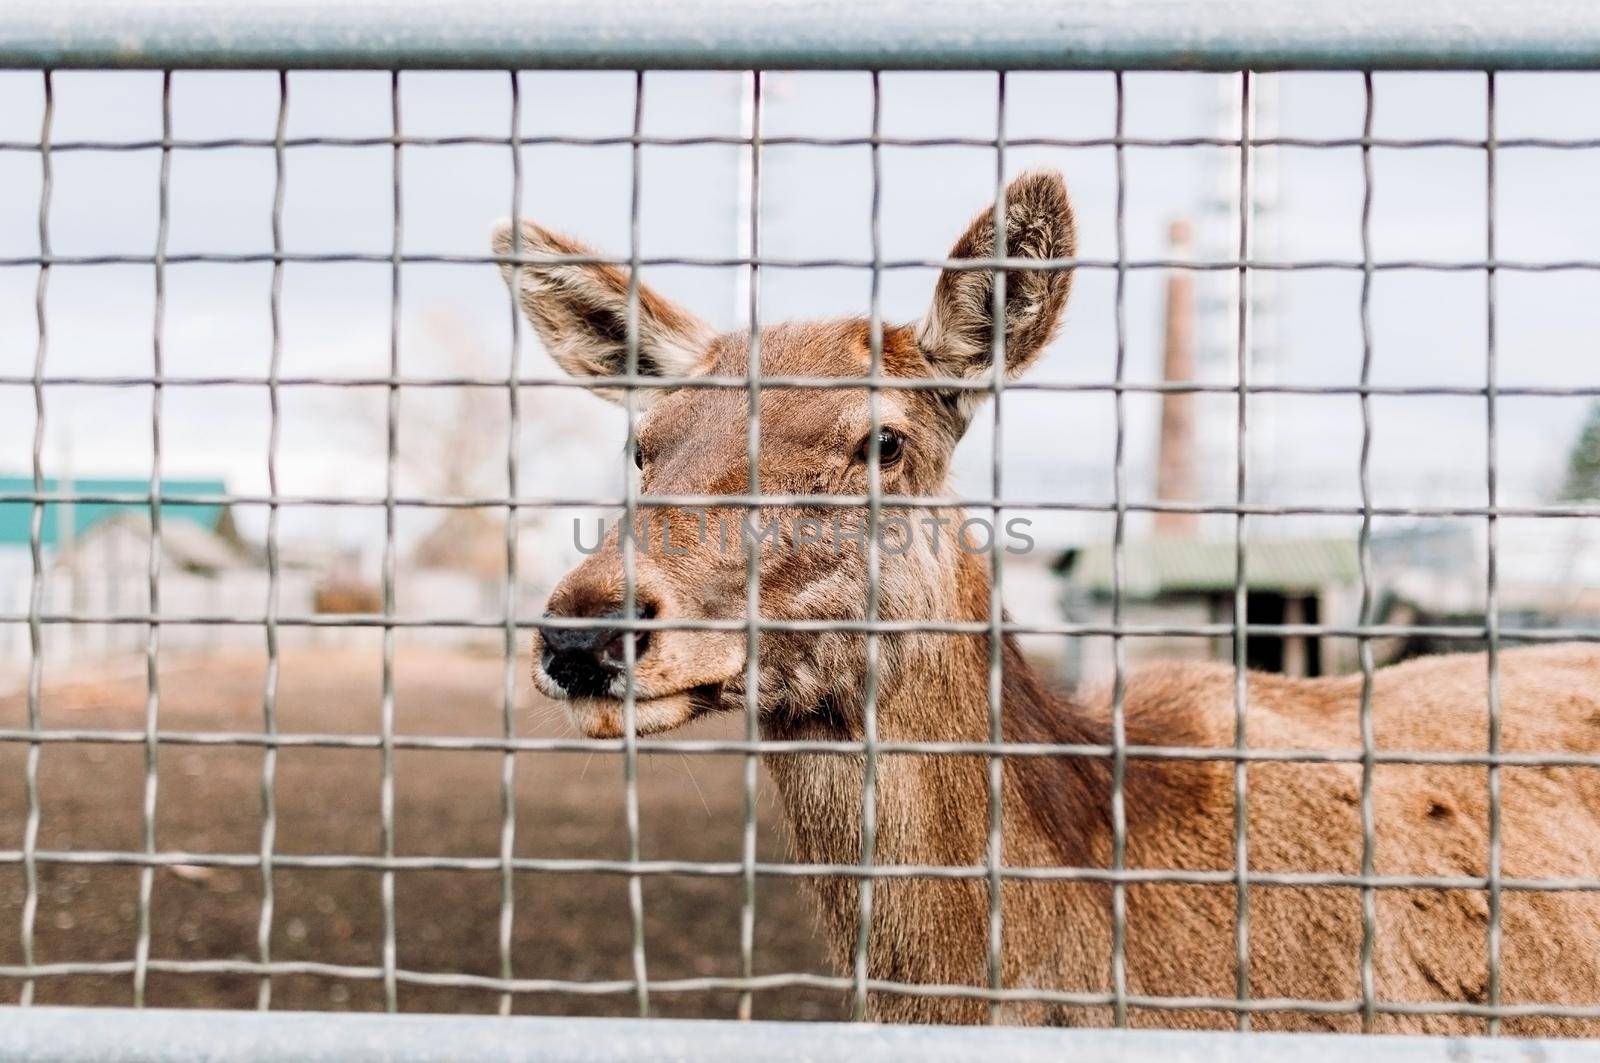 young deer in the zoo's aviary. Wildlife in limited conditions. Concept for the protection of the rights of animals trapped in cages.The problem of restricting the freedom of movement of wild animals.